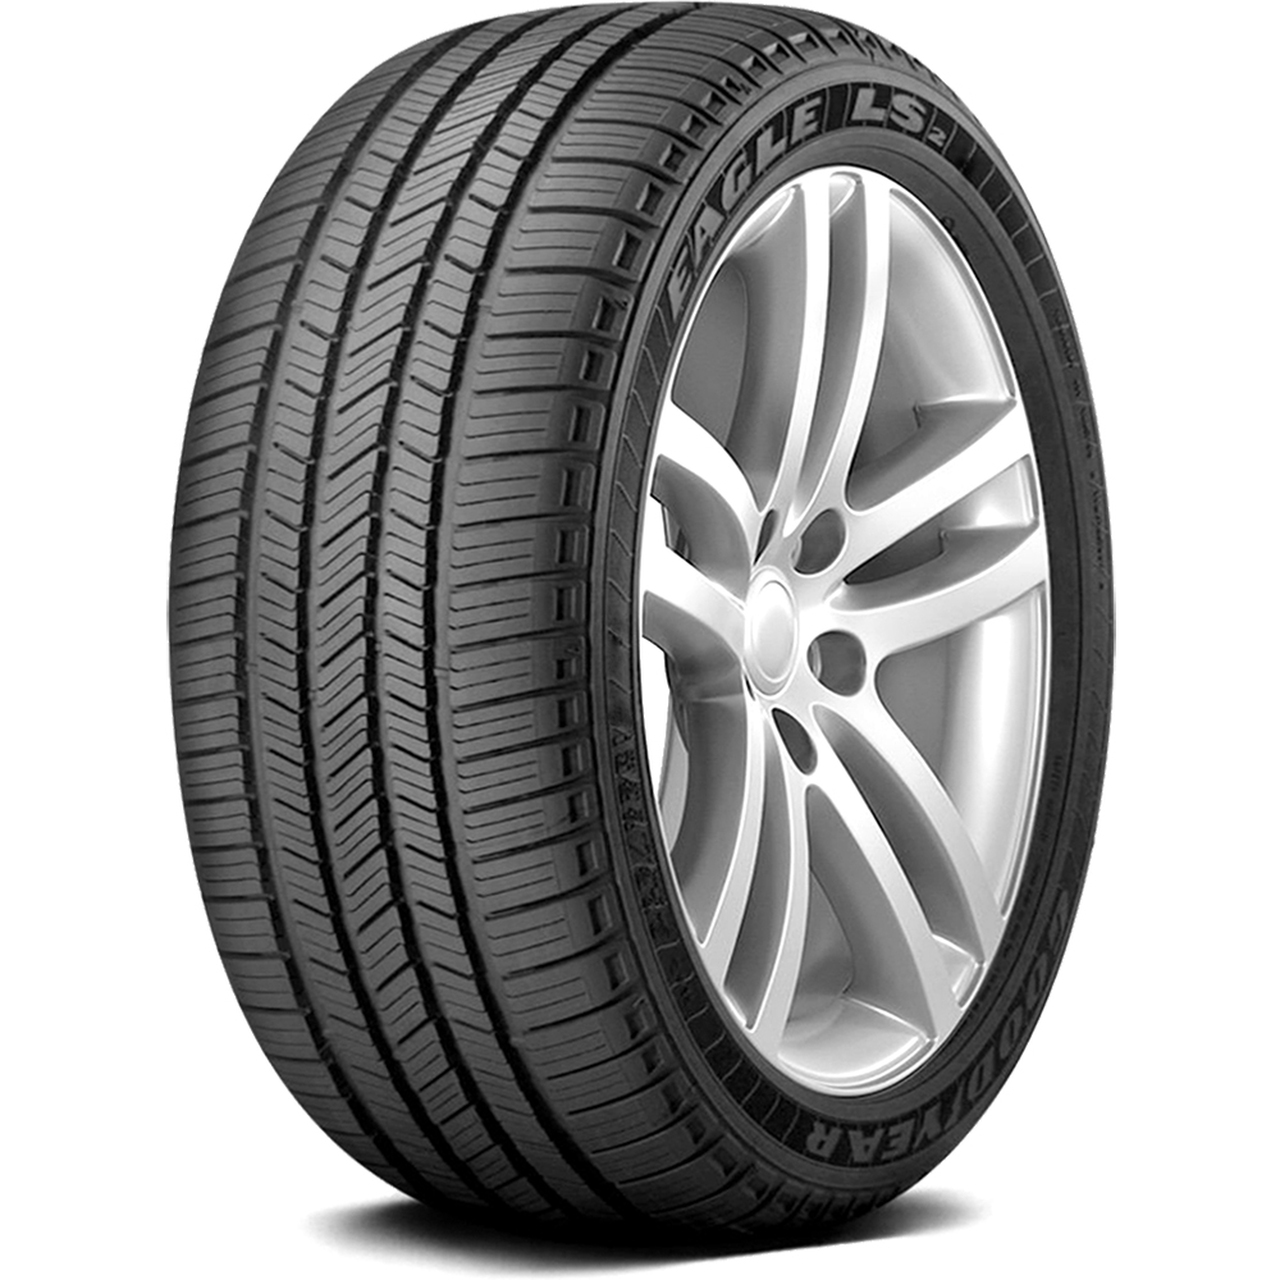 Goodyear Eagle LS2 - Tyre Reviews and Tests